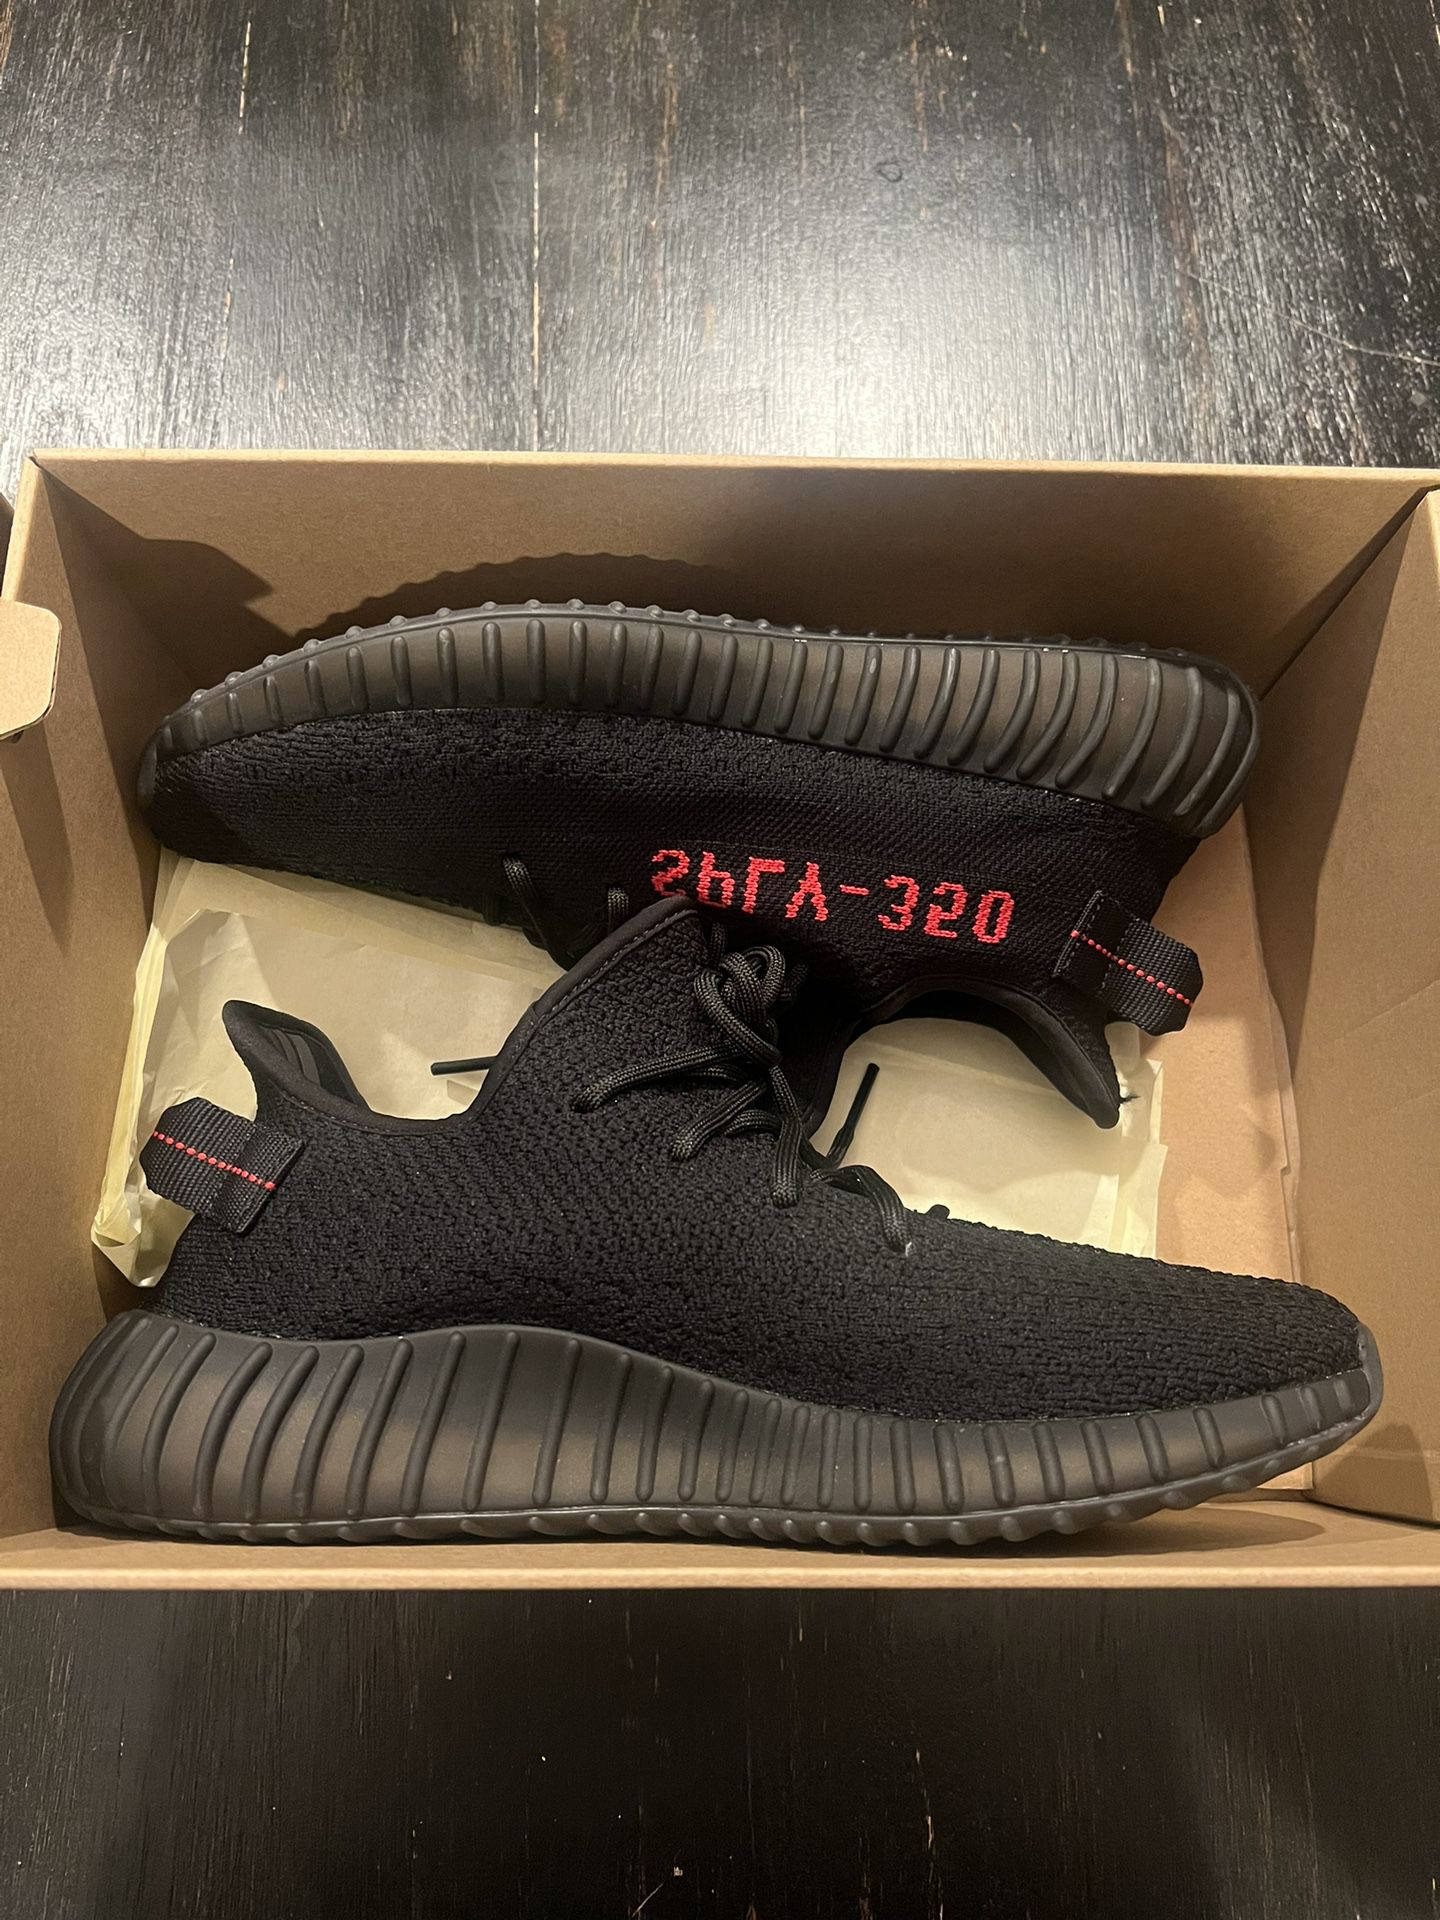 Size - 9 Yeezy Boost 350 V2 ‘Bred’ (Negotiable)